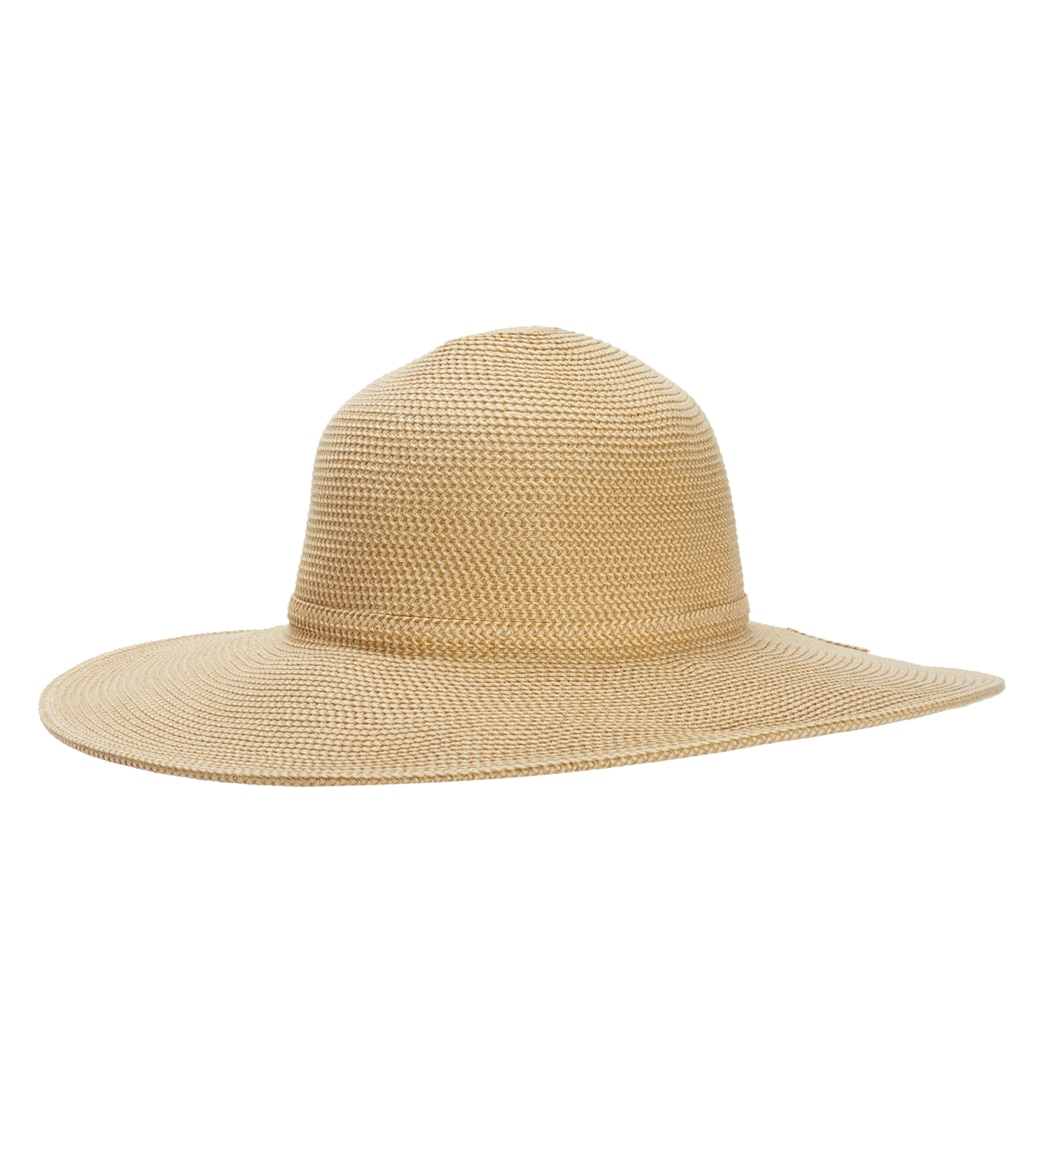 Sunday Afternoons Women's Riviera Hat - Natural Medium - Swimoutlet.com